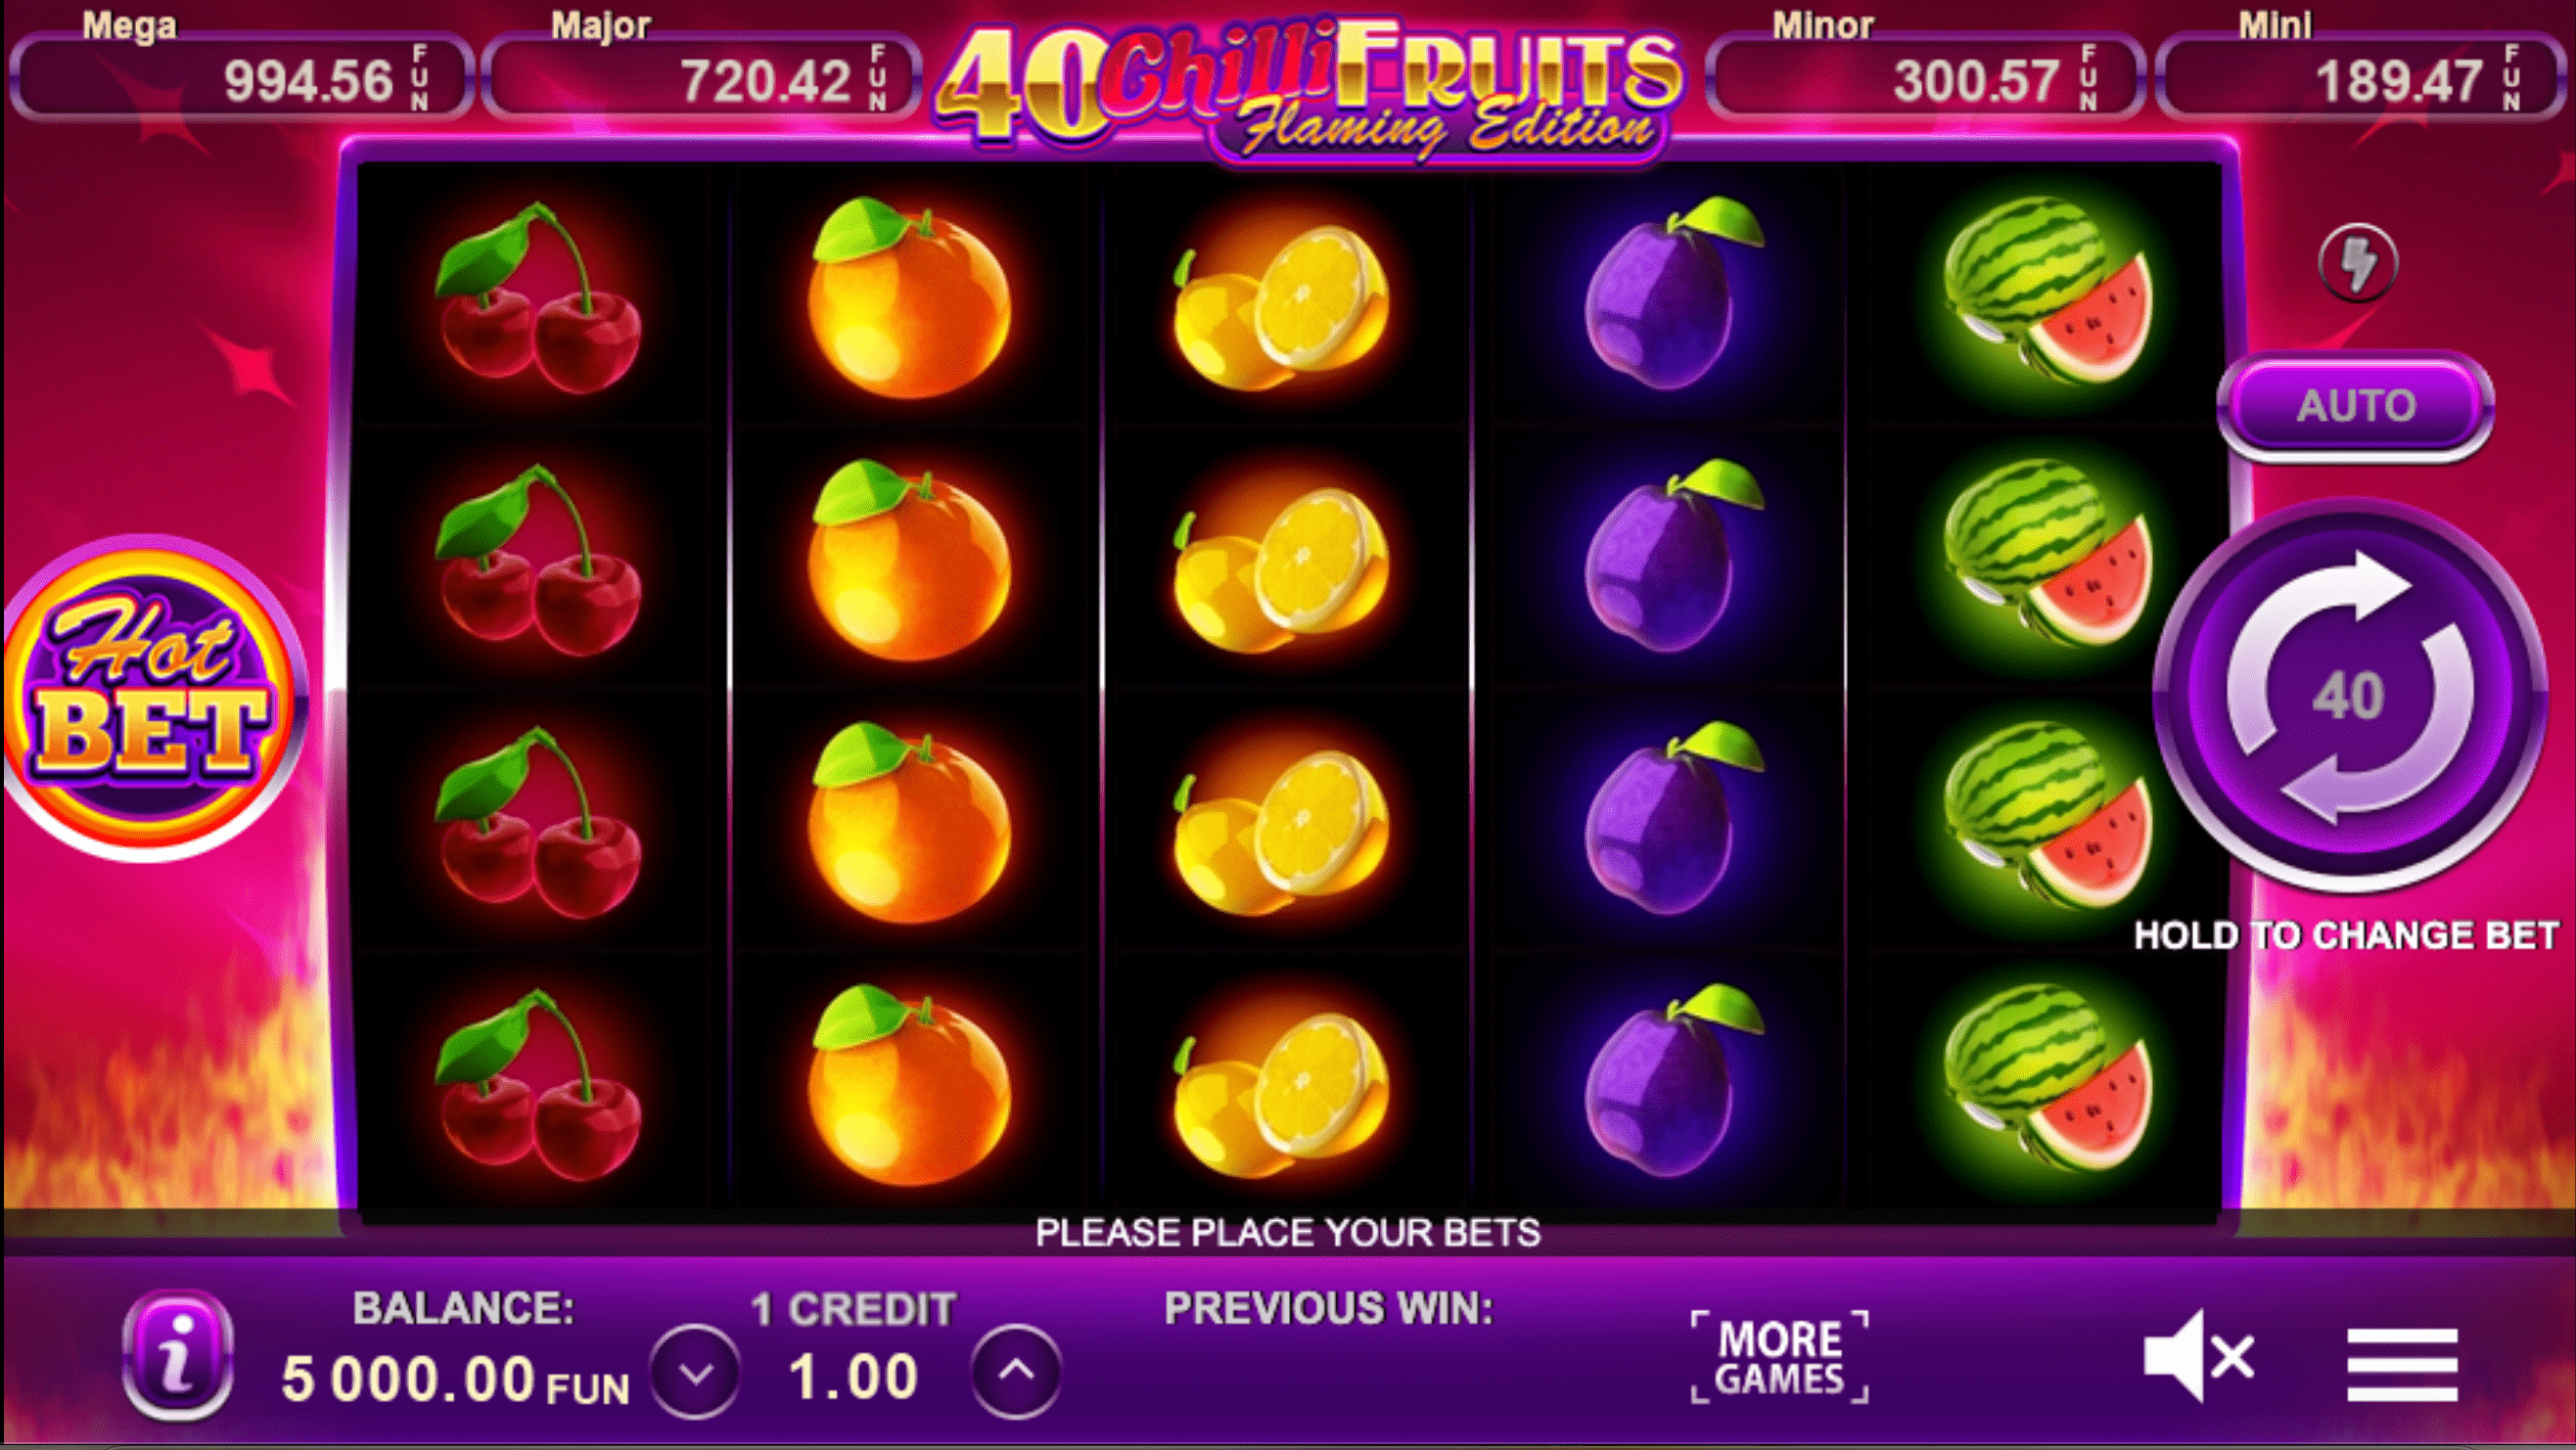 40 Chilli Fruits Flaming Edition Spel proces